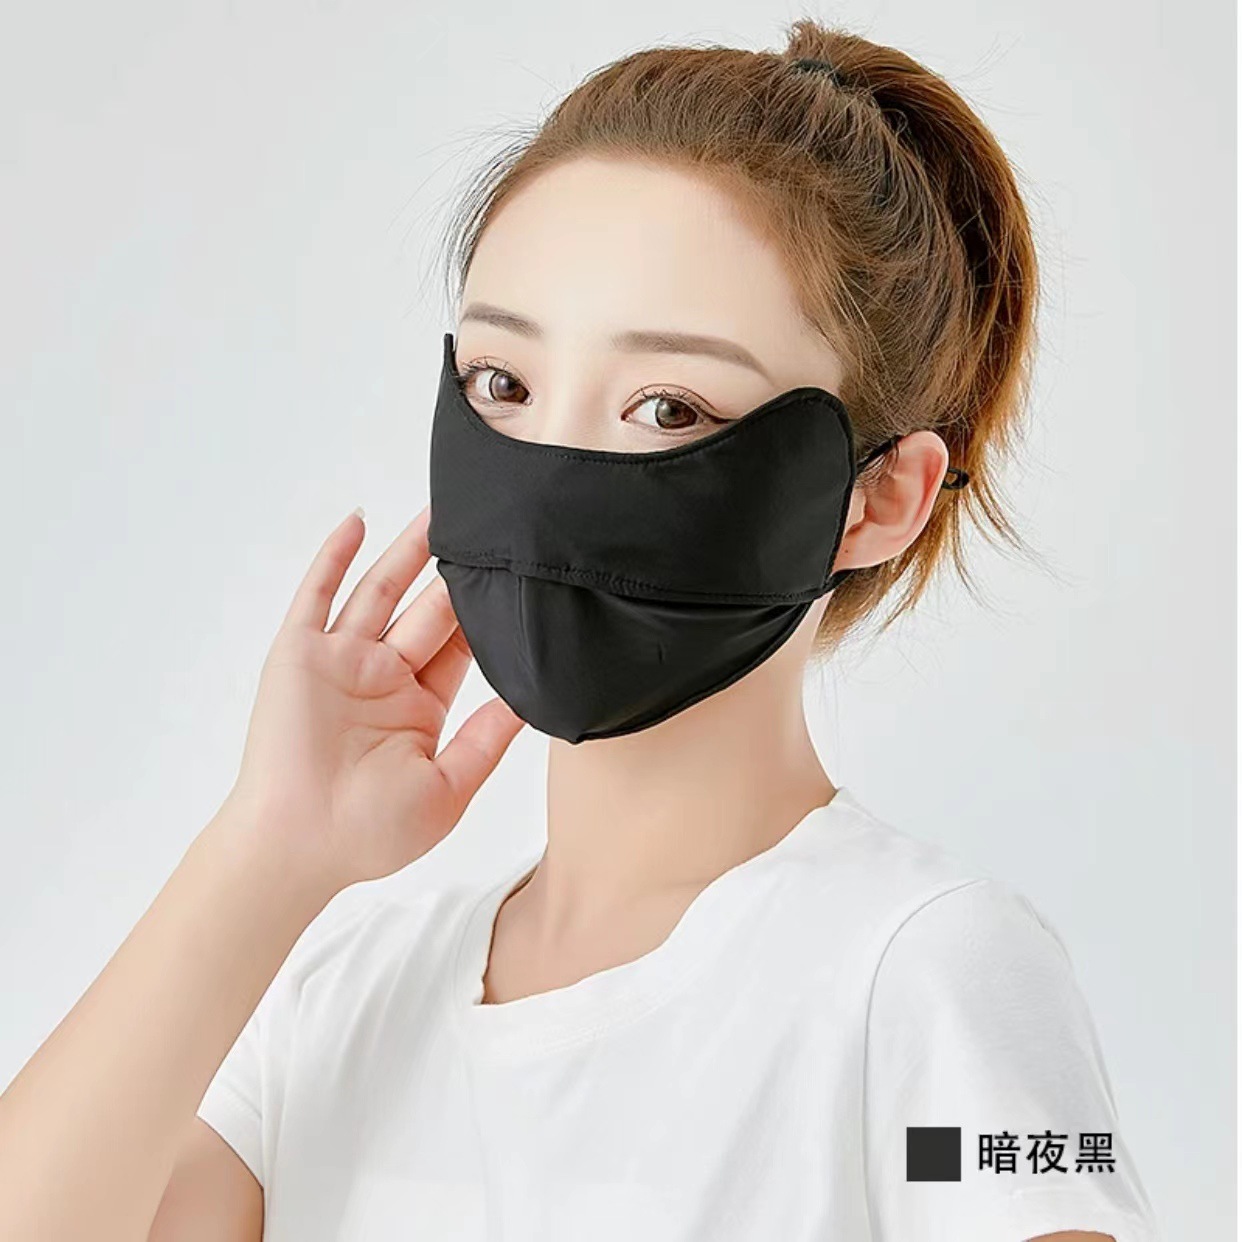 Ice Silk Sunscreen Mask Summer Women's Uv Protection Eye Protection Three-Dimensional Dustproof and Breathable Thin Outdoor Mask Protection